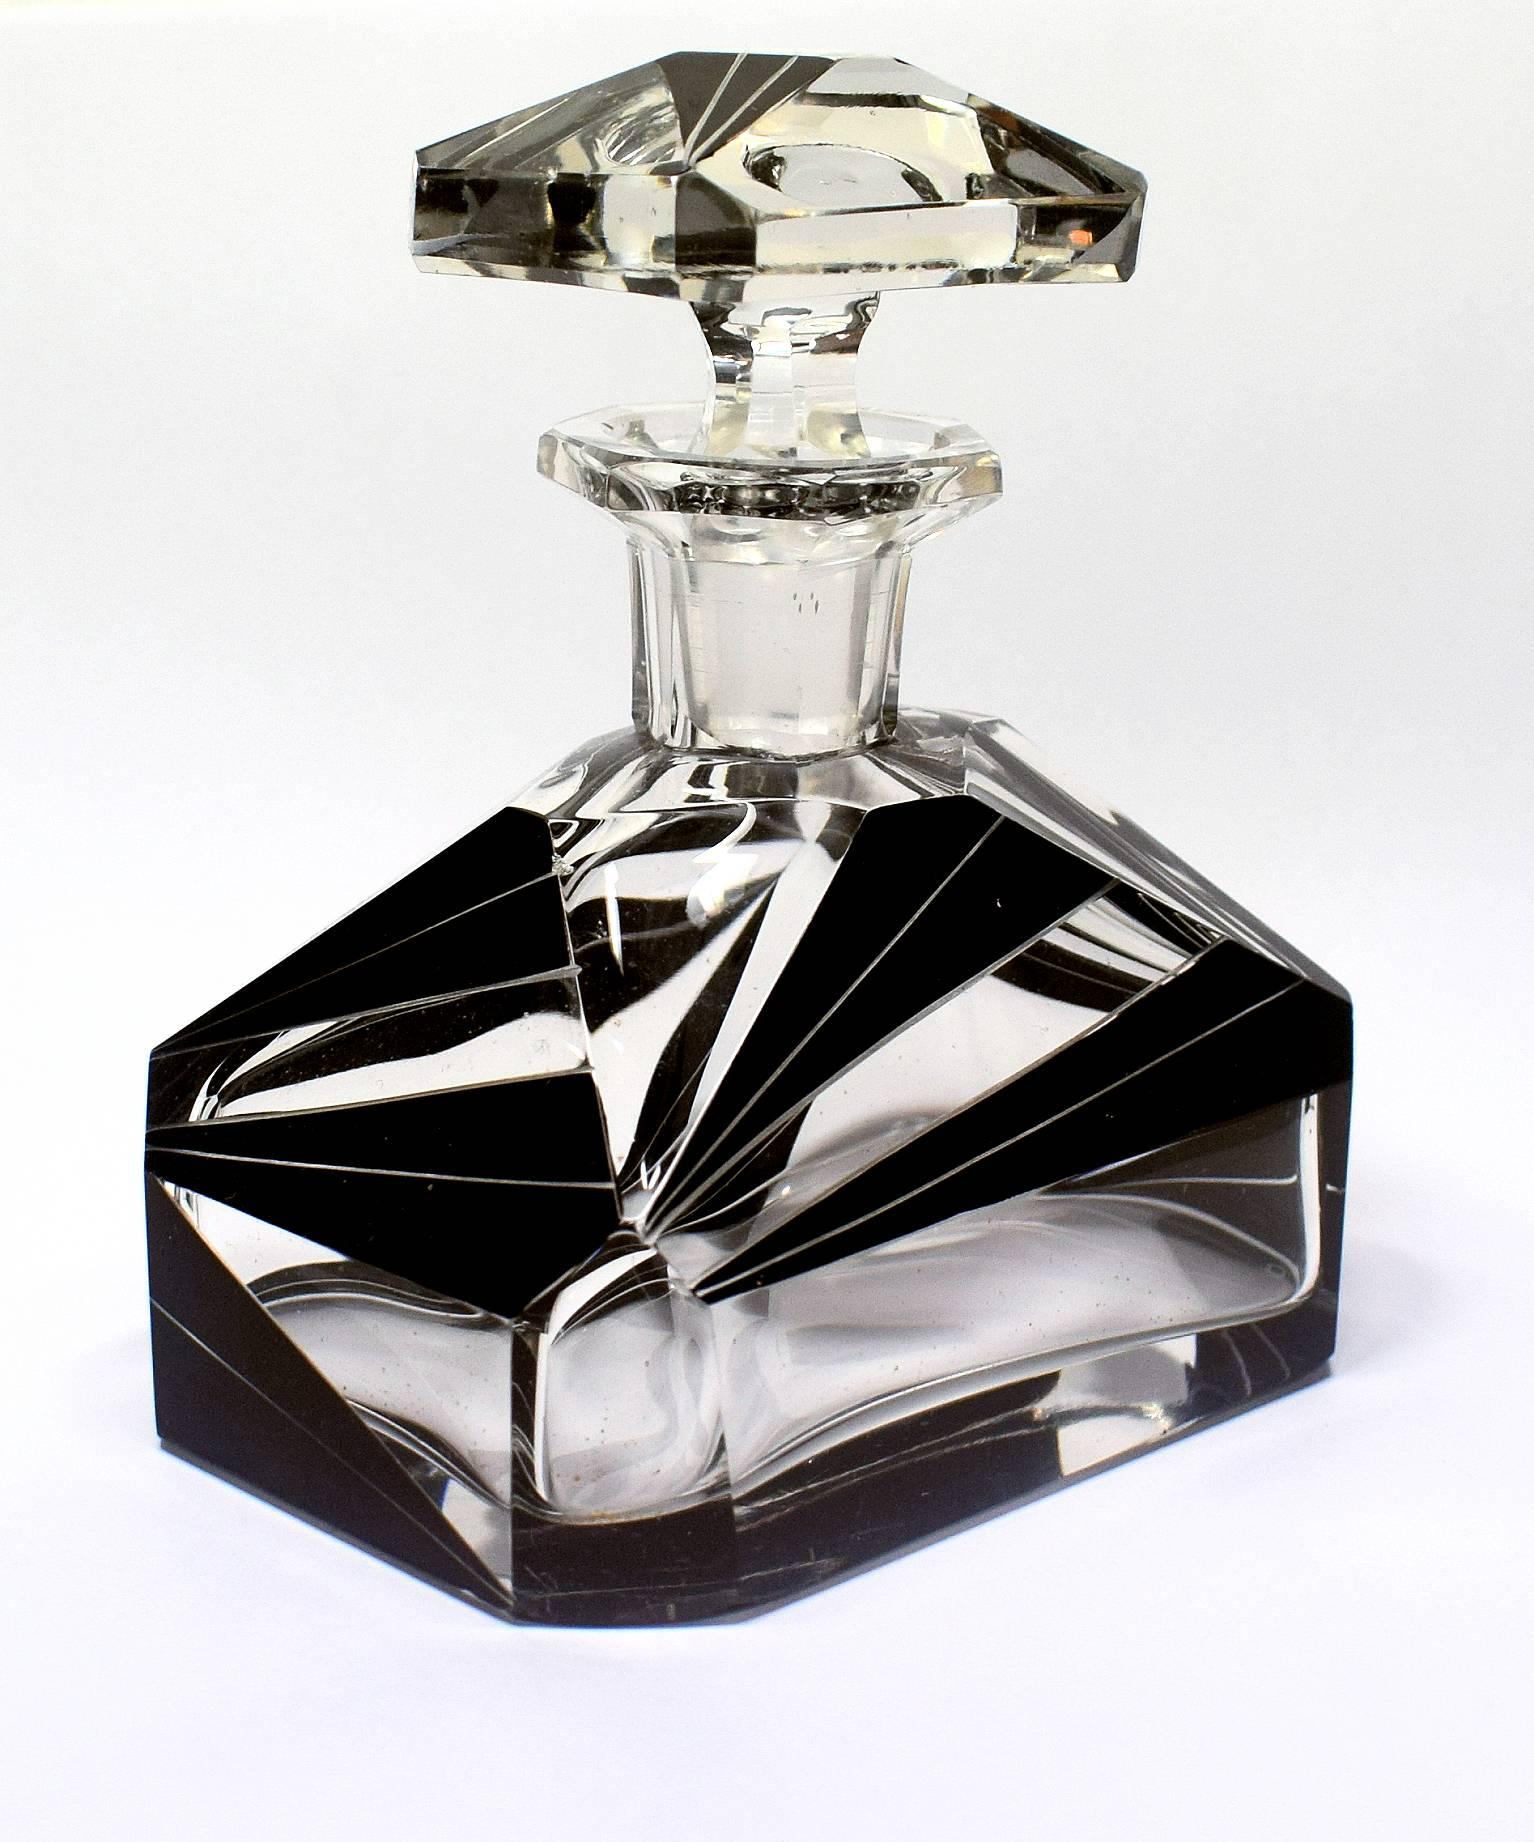 For your consideration is this wonderful 1930s Art Deco perfume bottle by Karl Palda with black geometric decoration. Great size to use for perfumes of even salts in the bathroom. Condition is great with no damage at all.